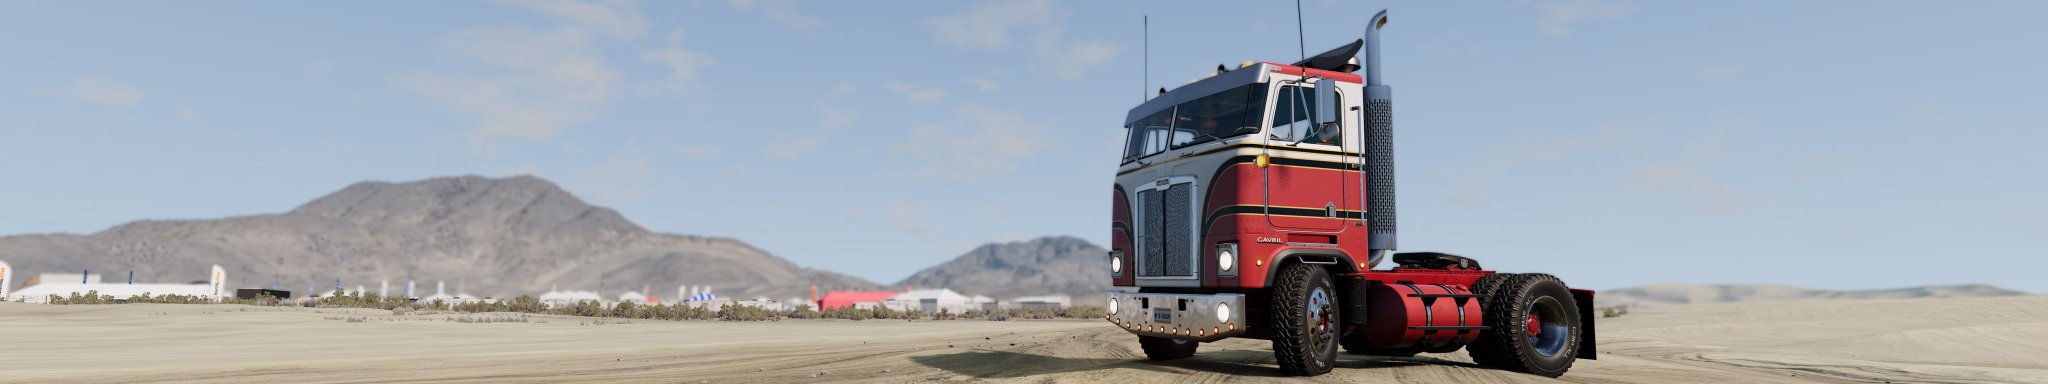 0 BeamNG Gavril TC82 Custom with OFF ROAD TIRES at JOHNSON VALLEY copy.jpg